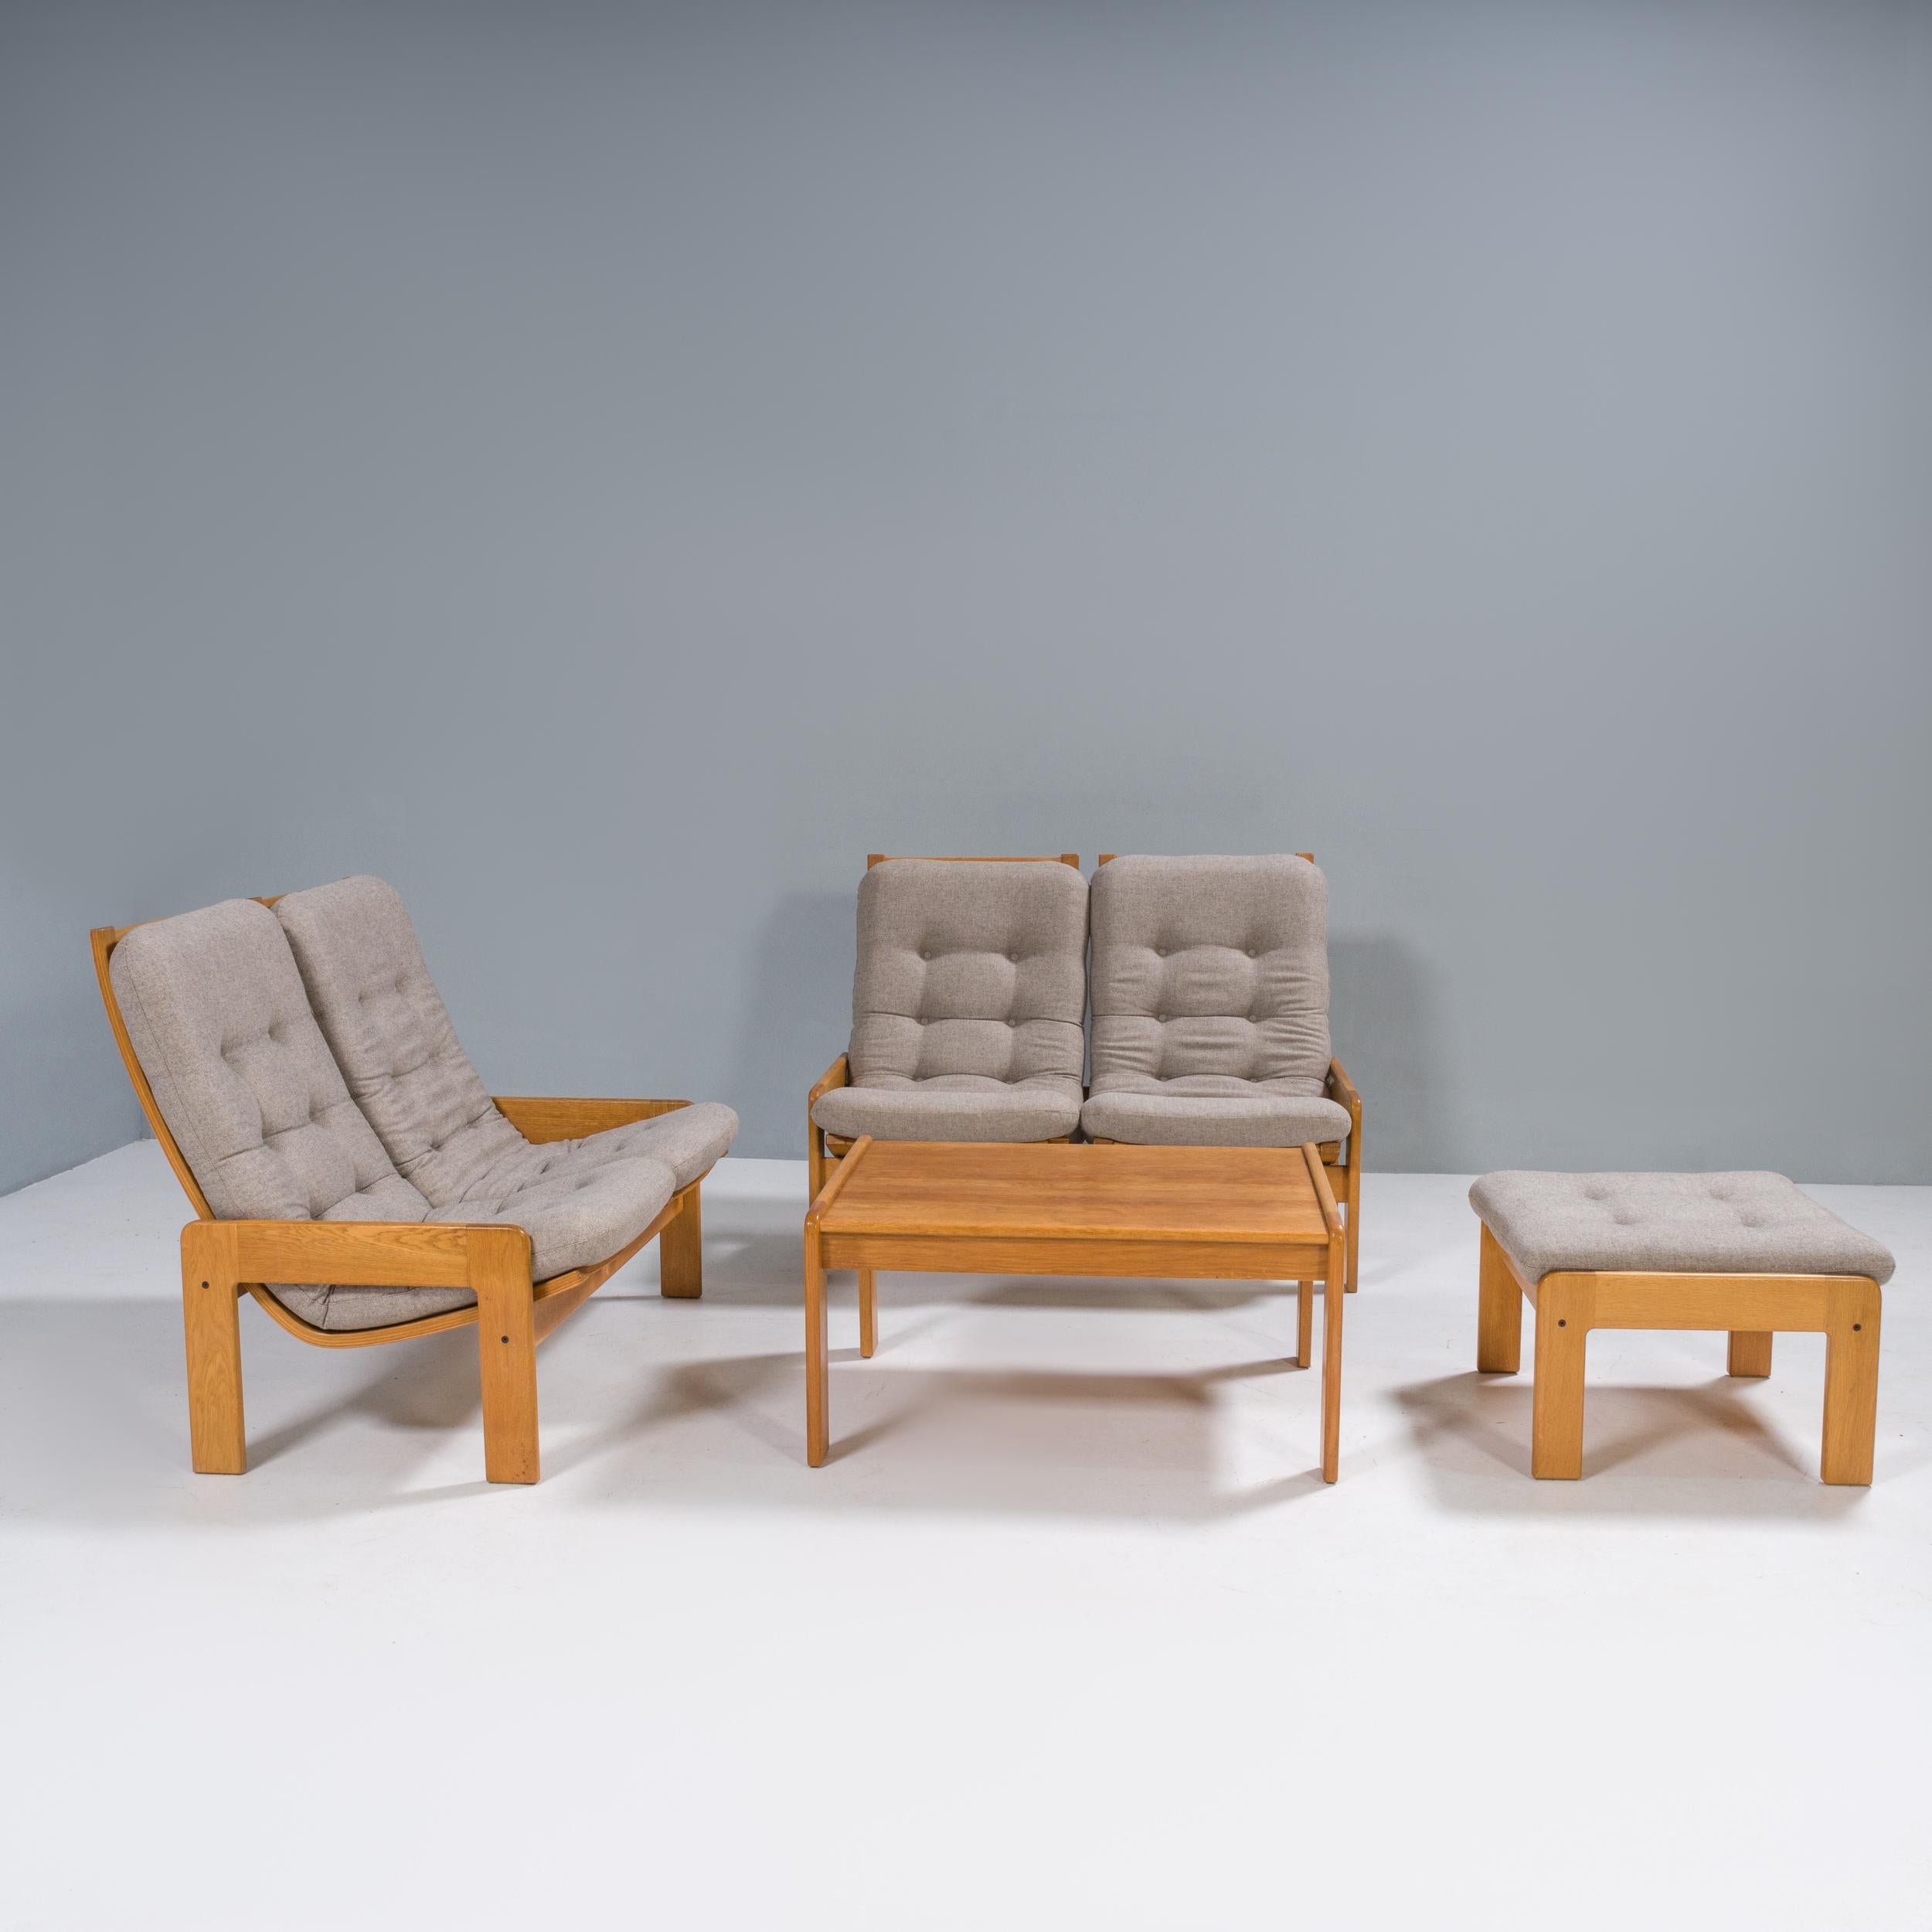 Yngve Ekström was one of the most important figures in the evolution of the Scandinavian Modernism movement and co-founder of the furniture design company Swedese.

This living room set comprises of two 2-seat sofas, a matching footstool and a